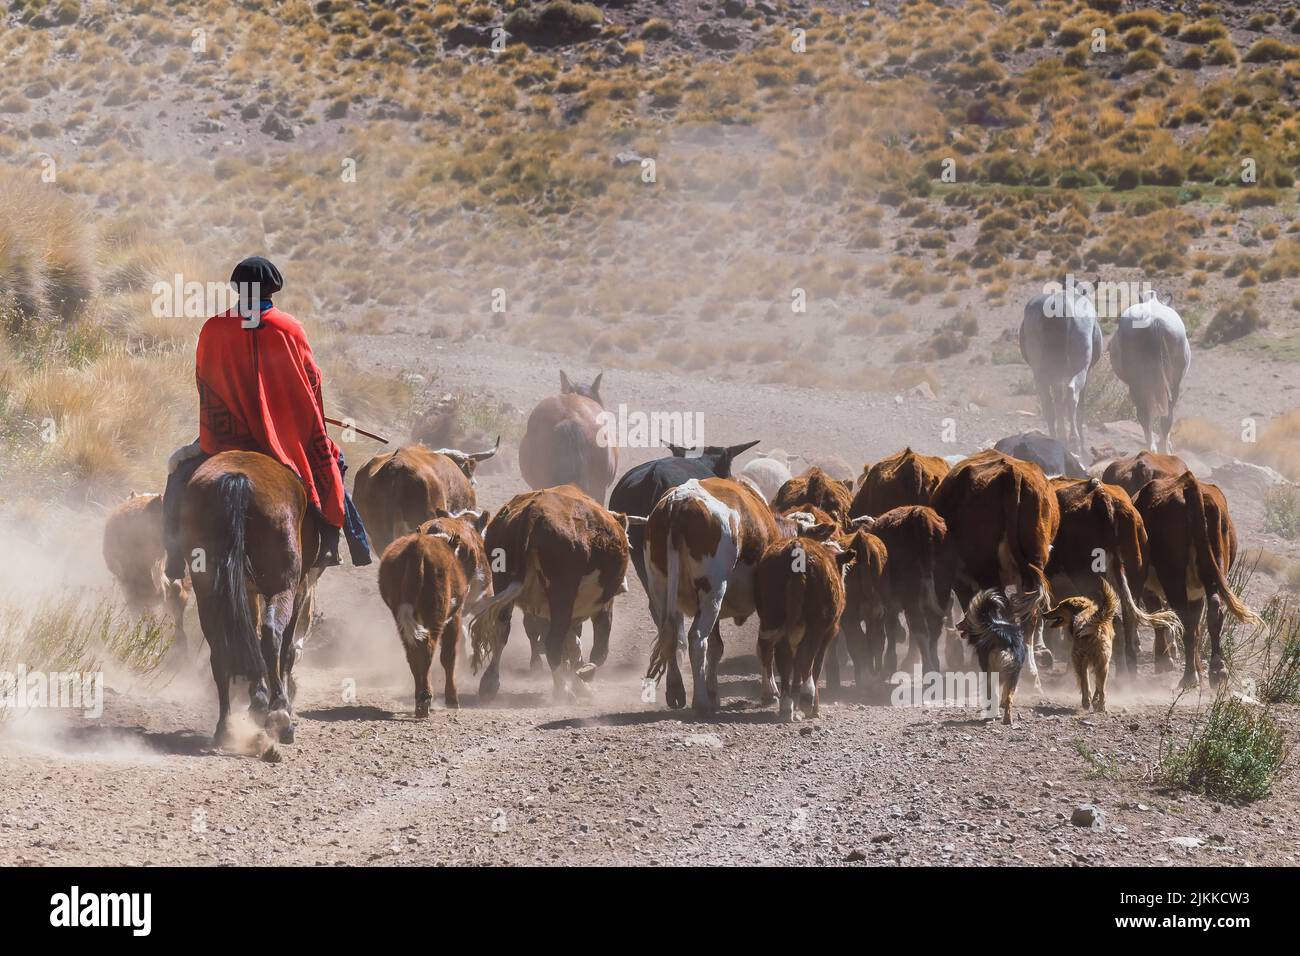 Gaucho and herd of cows, Patagonia, Argentina Stock Photo